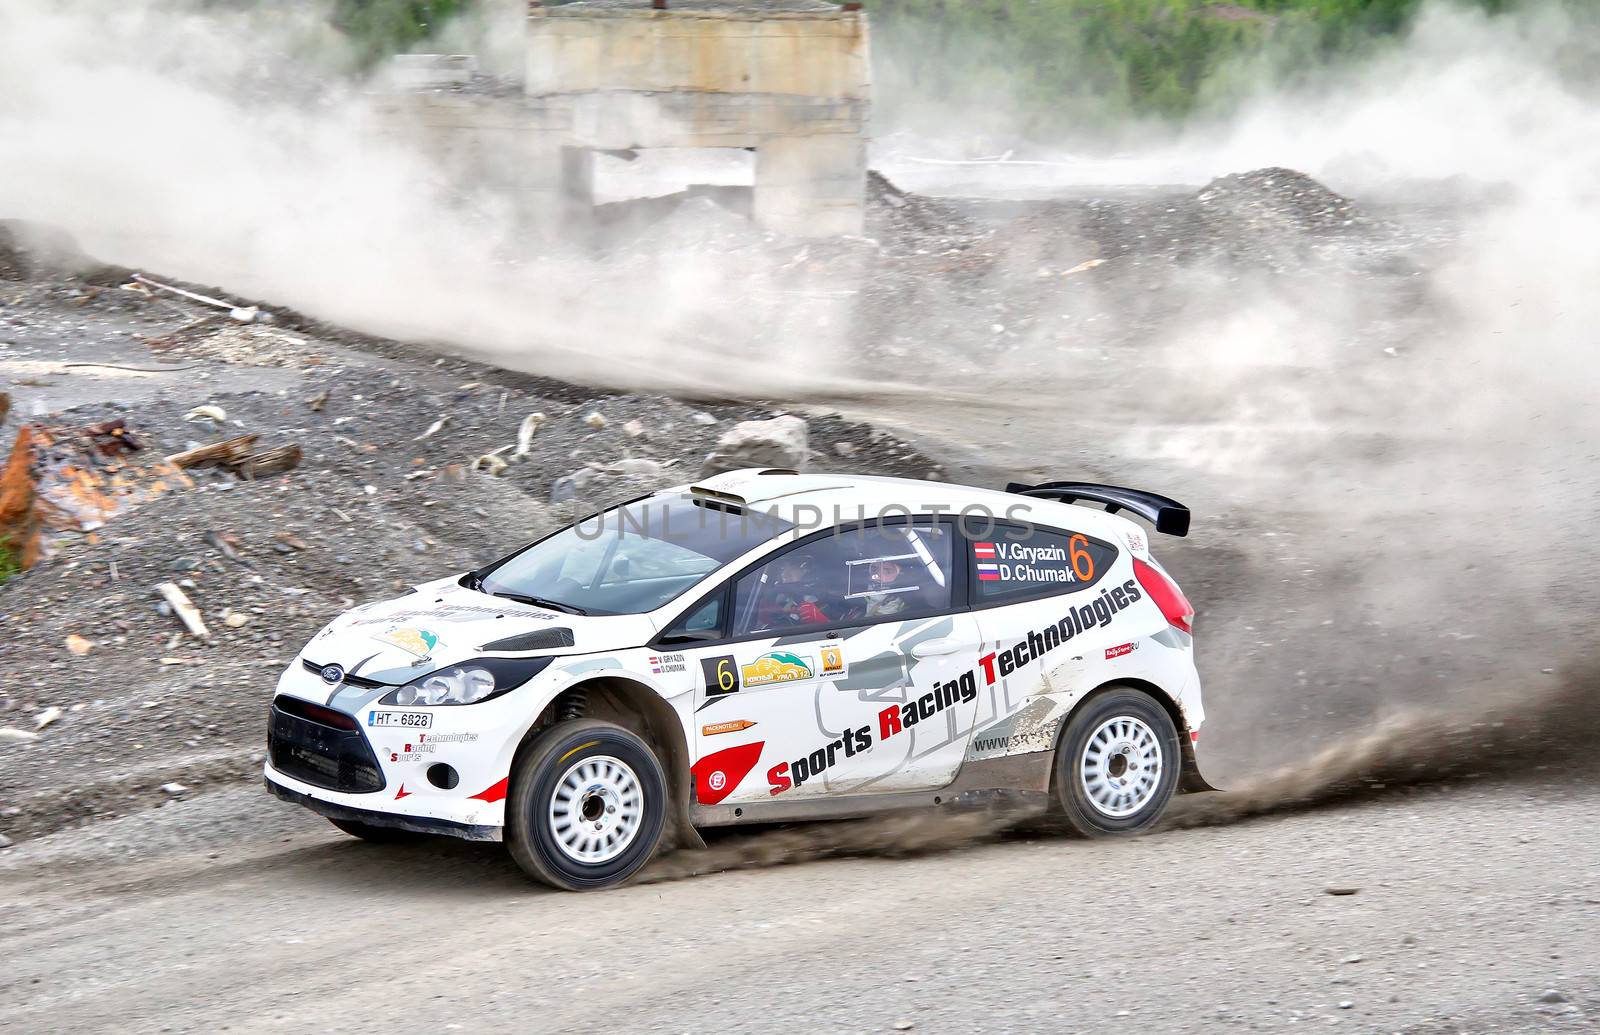 BAKAL, RUSSIA - JULY 21: Vasiliy Gryazin's Ford Fiesta (No. 6) competes at the annual Rally Southern Ural on July 21, 2012 in Bakal, Satka district, Chelyabinsk region, Russia.